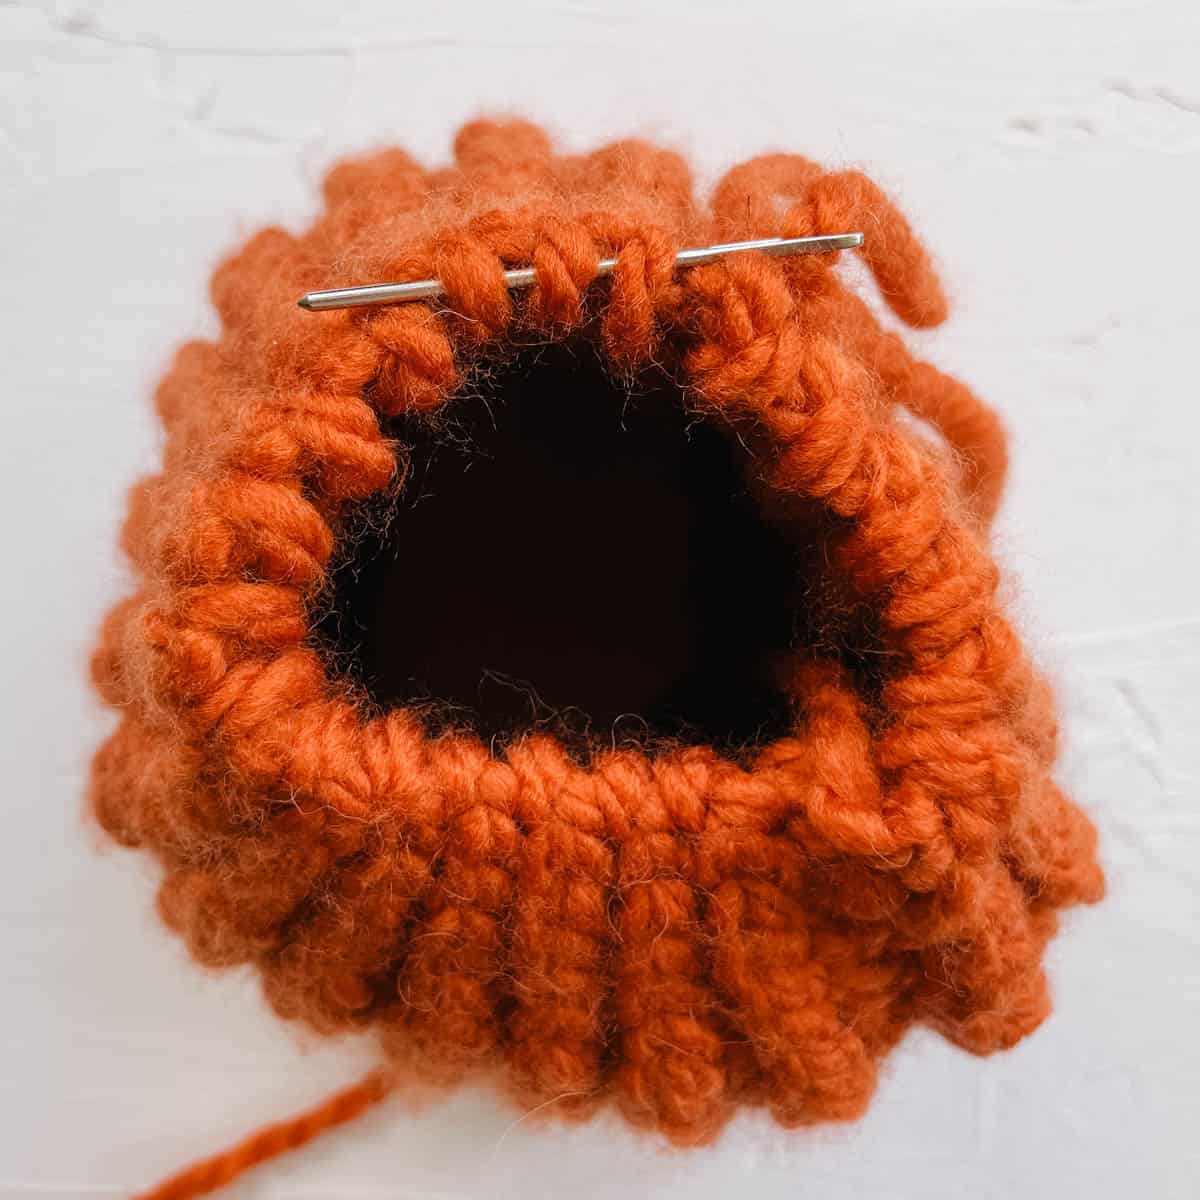 Top view of a crochet tube being closed into a pumpkin hat.